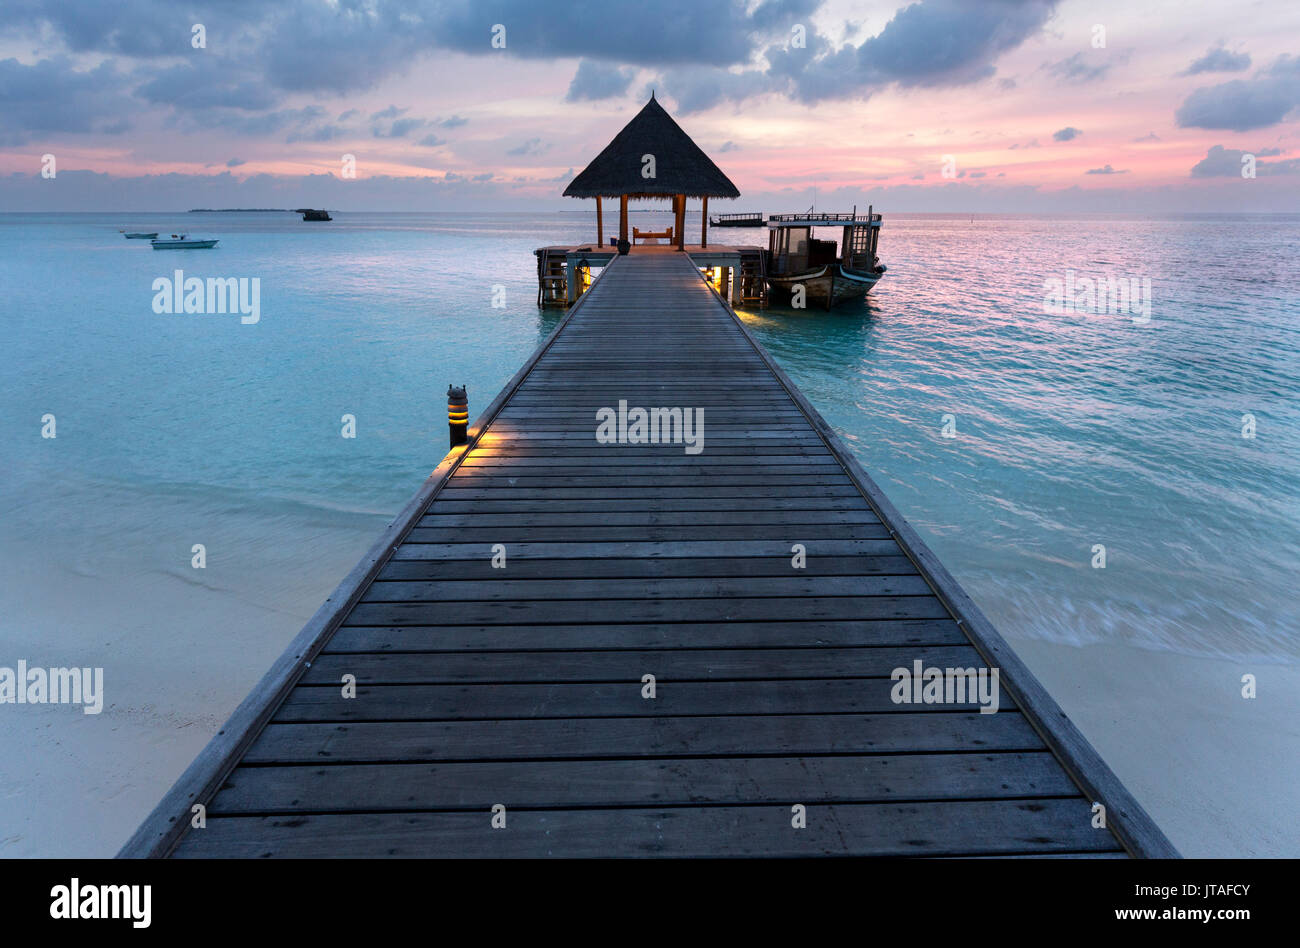 Wooden jetty and boat at sunset, Coco Palm Resort, Dhuni Kolhu, Baa Atoll, Republic of Maldives, Indian Ocean, Asia Stock Photo